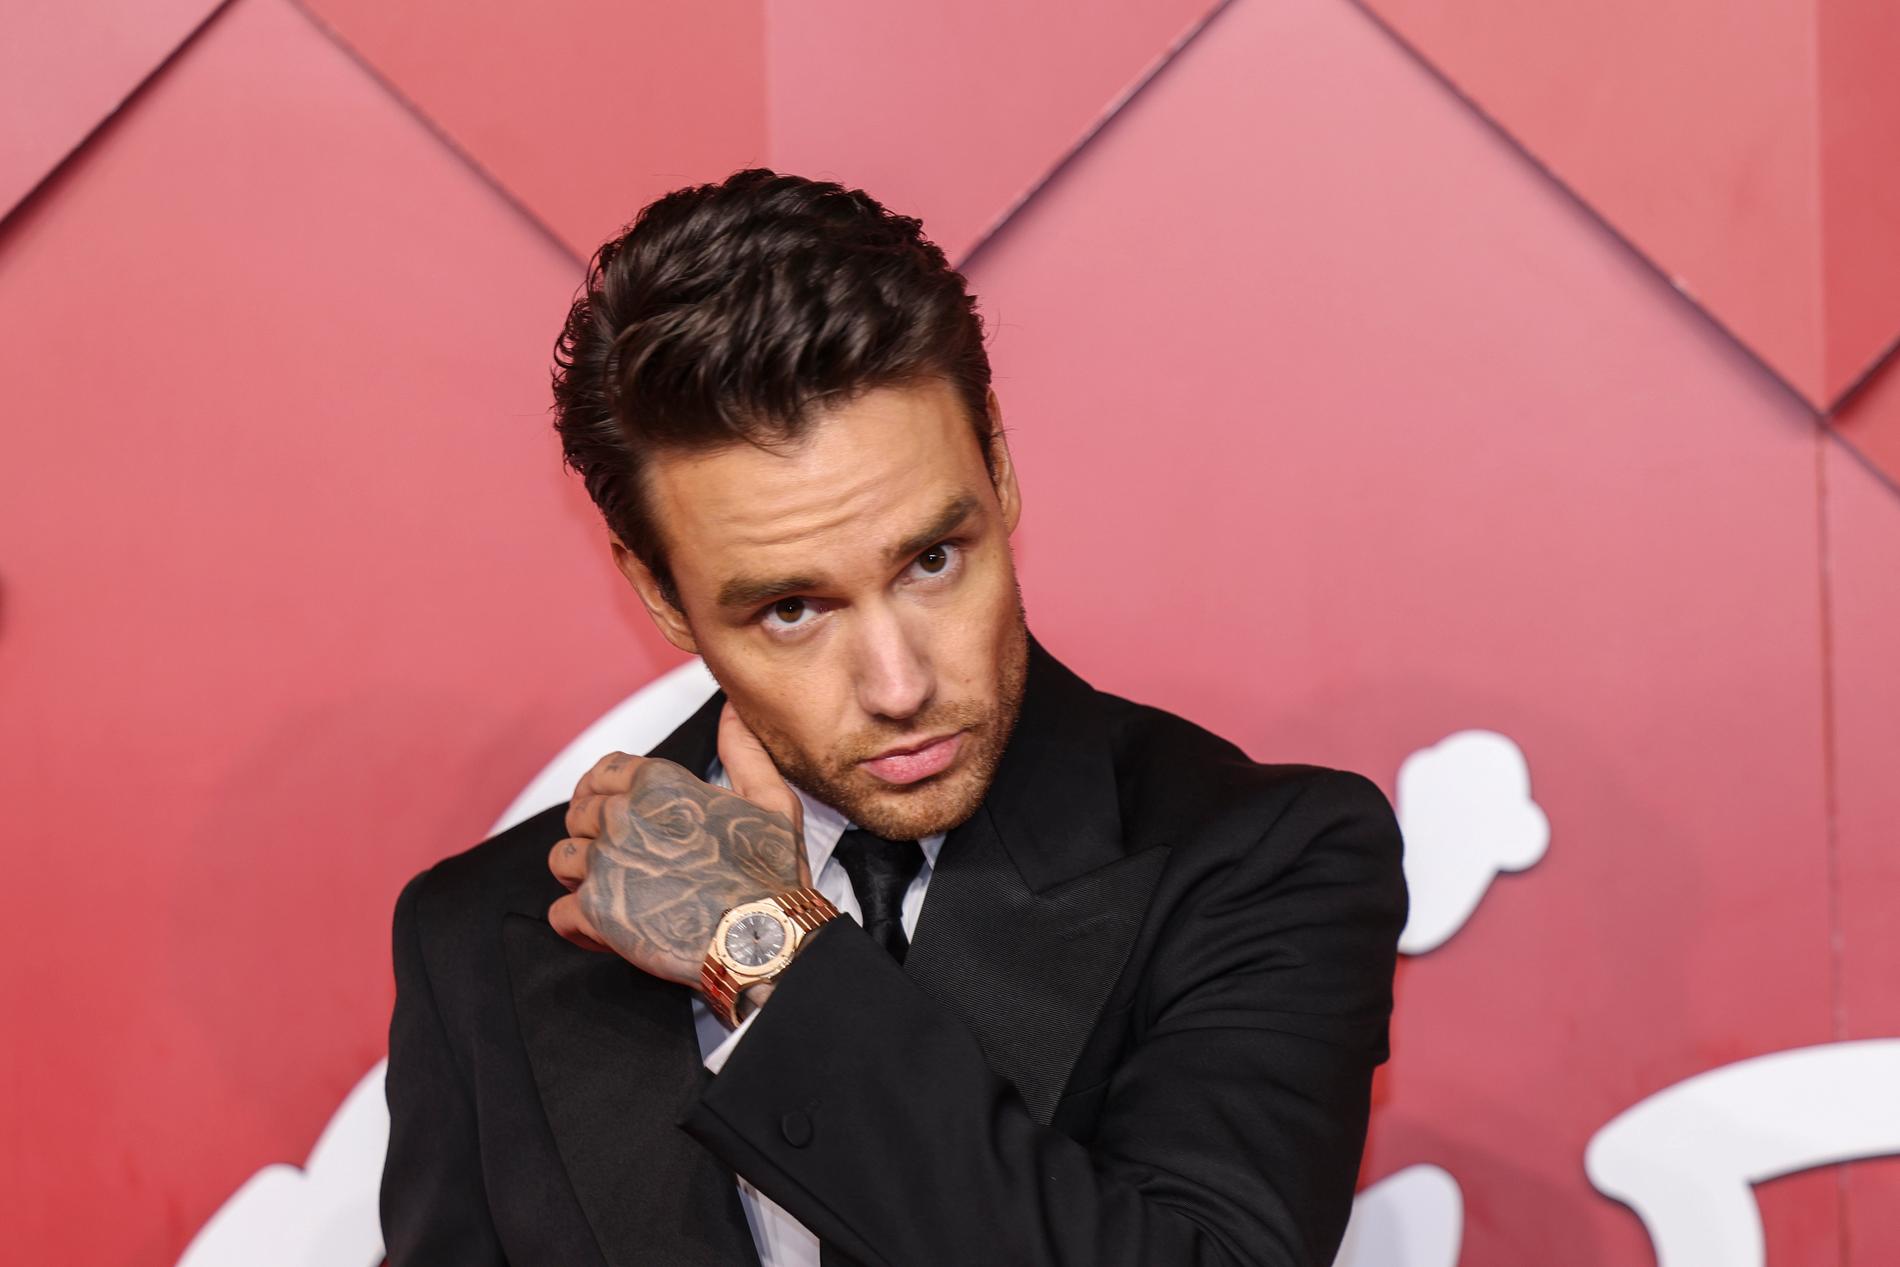 Liam Payne postpones his tour after being hospitalized